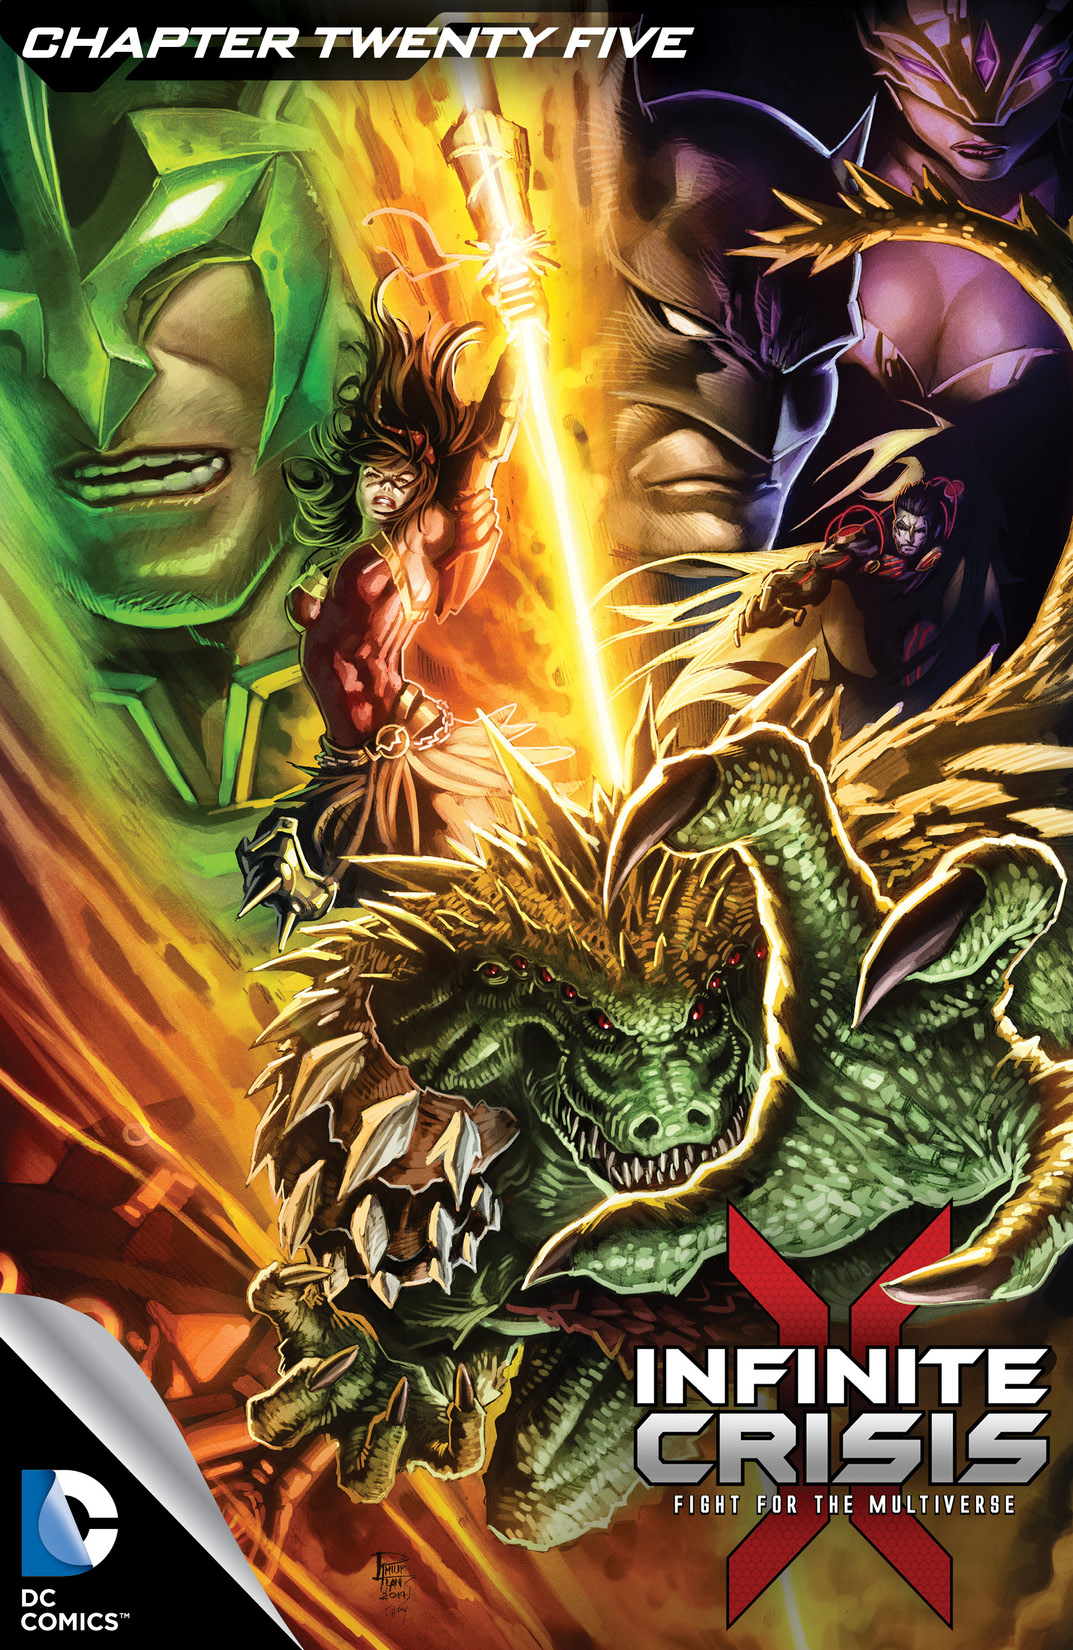 Infinite Crisis: Fight for the Multiverse #25 preview images